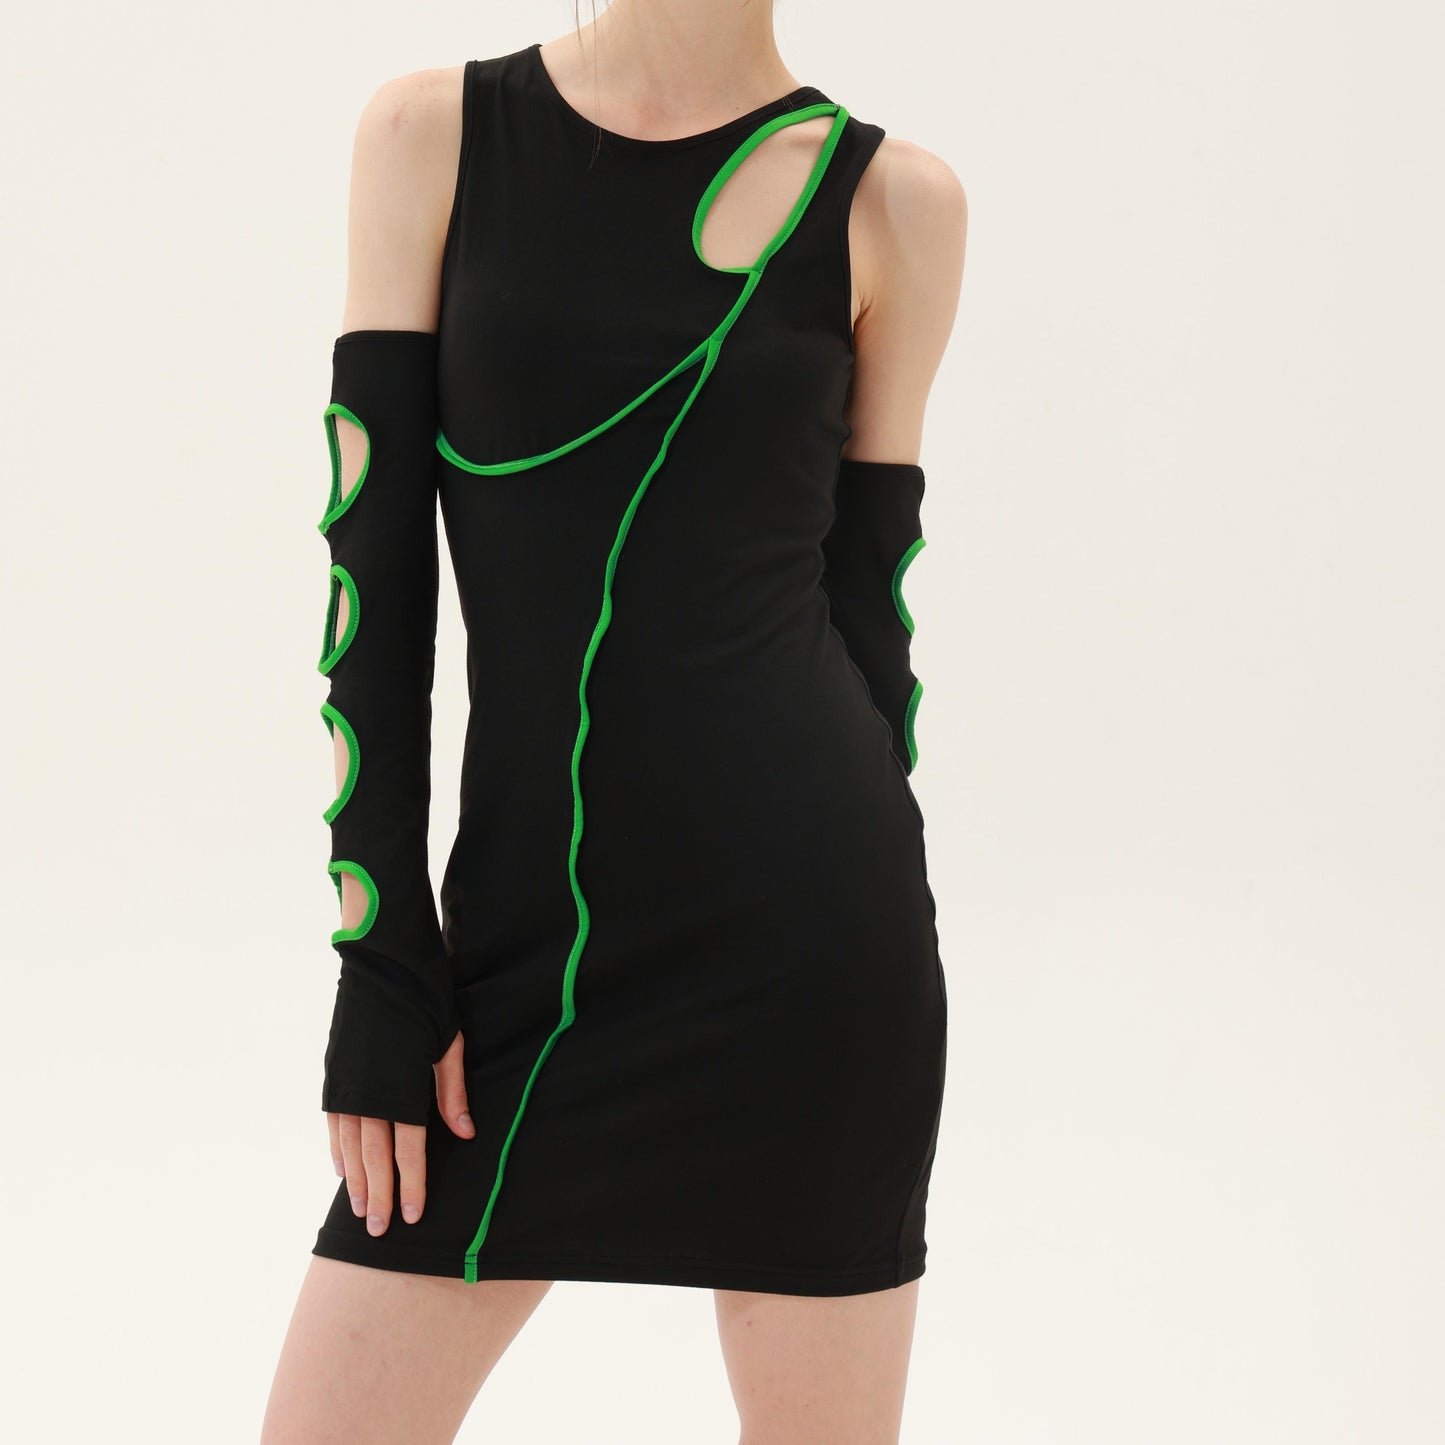 Contrast cut out dress for women